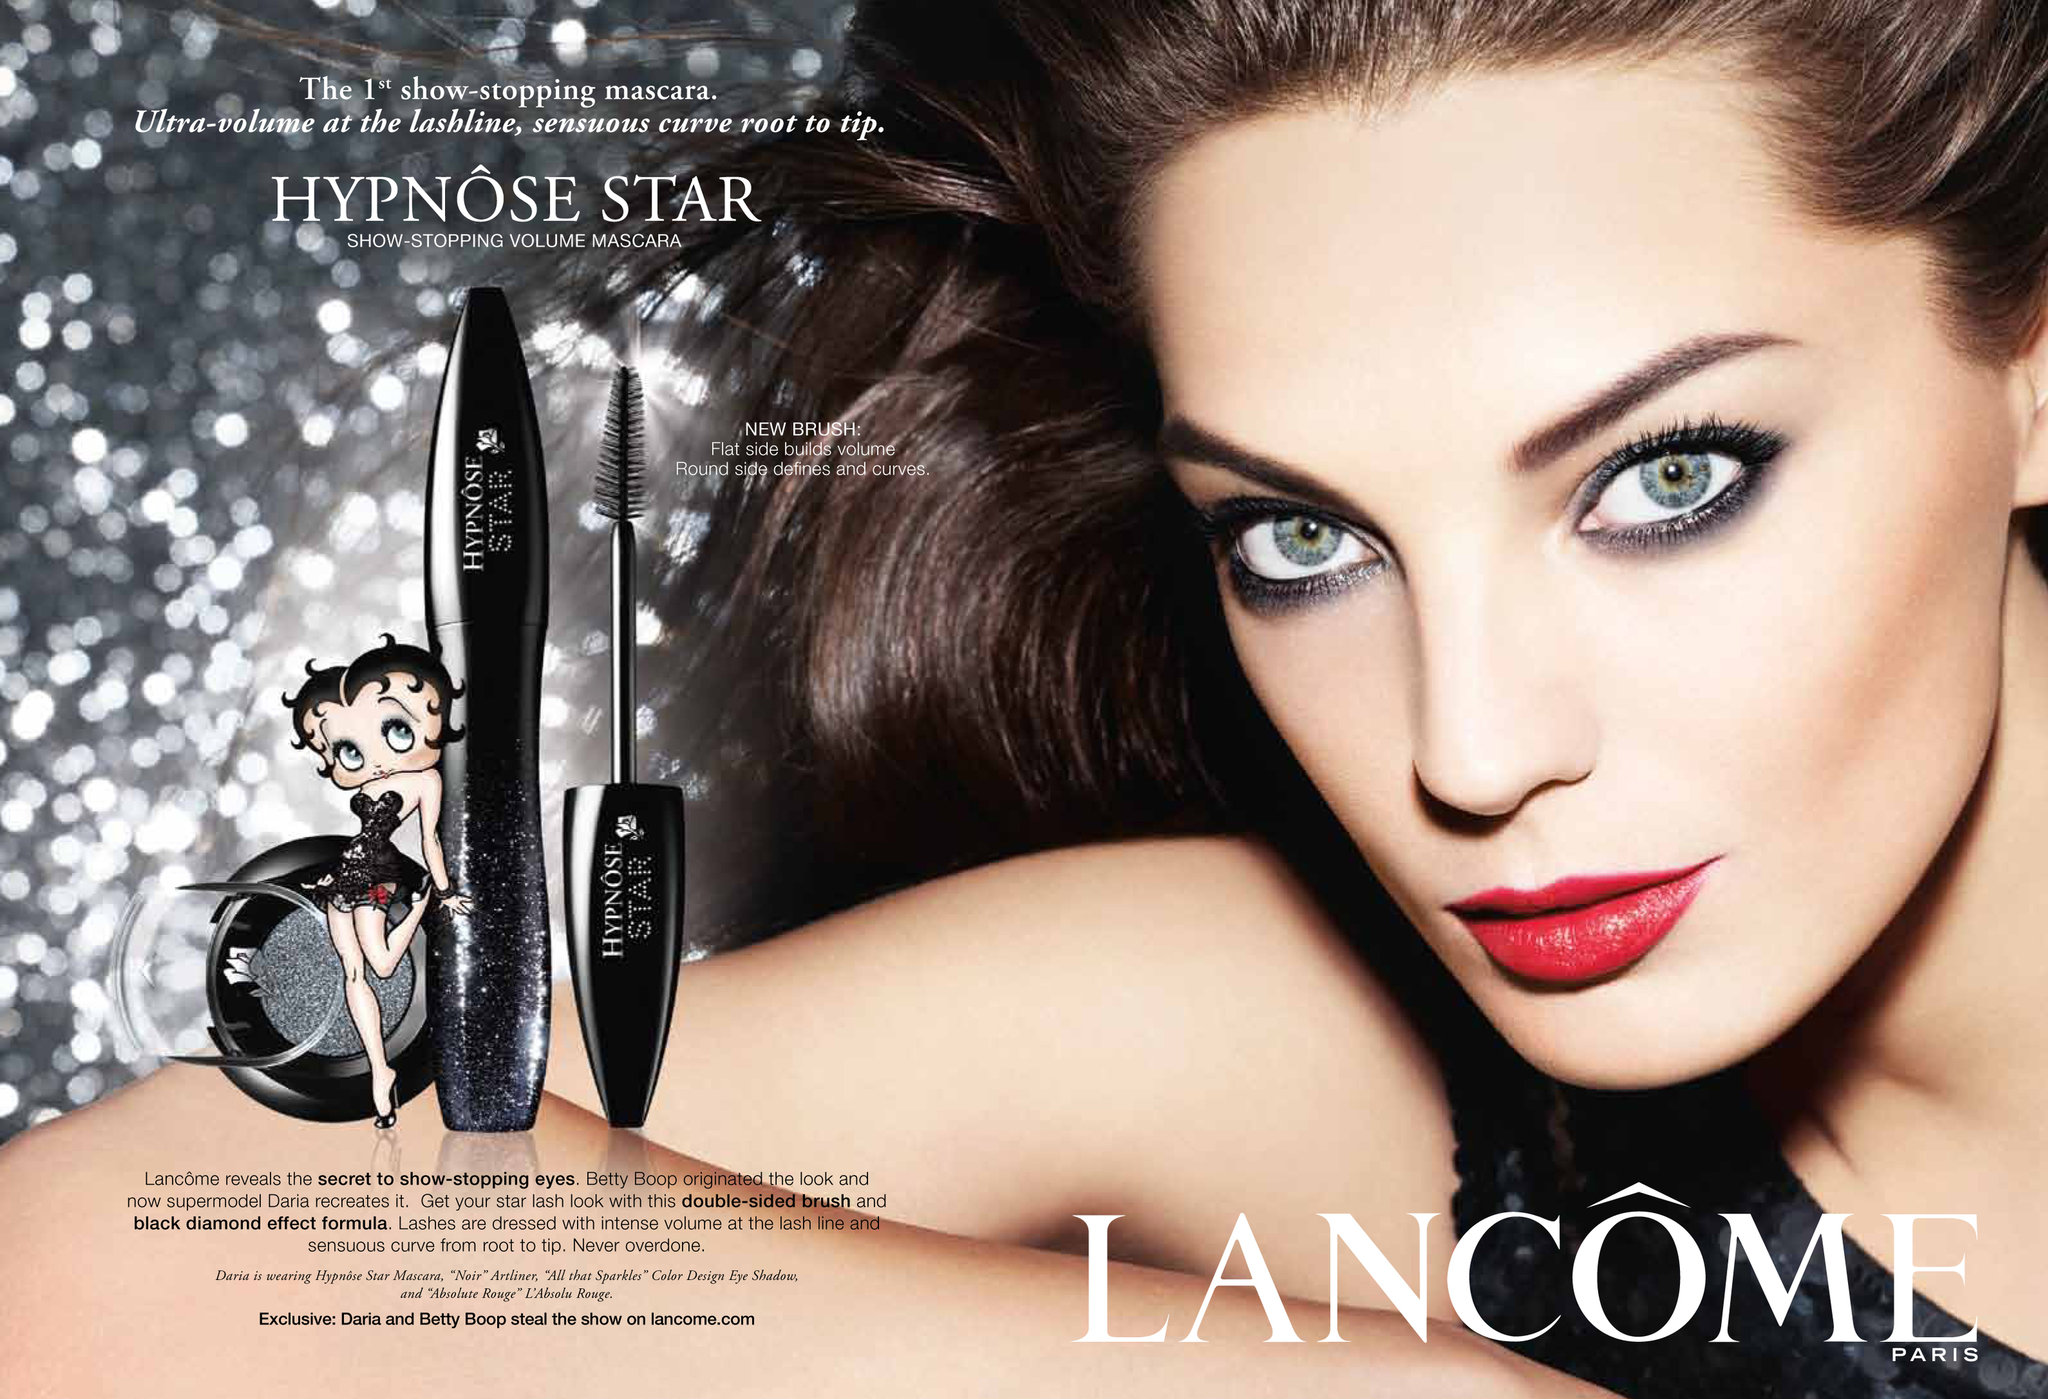 How To Get Beautiful Skin, Healthy Skin, And Smooth Radiant Skin. Beautiful Model Daria Werbowy Modeling For Lancome Ads And Lancome Advertisements. How To Get Beautiful Glowing Skin And Gorgeous Skin.